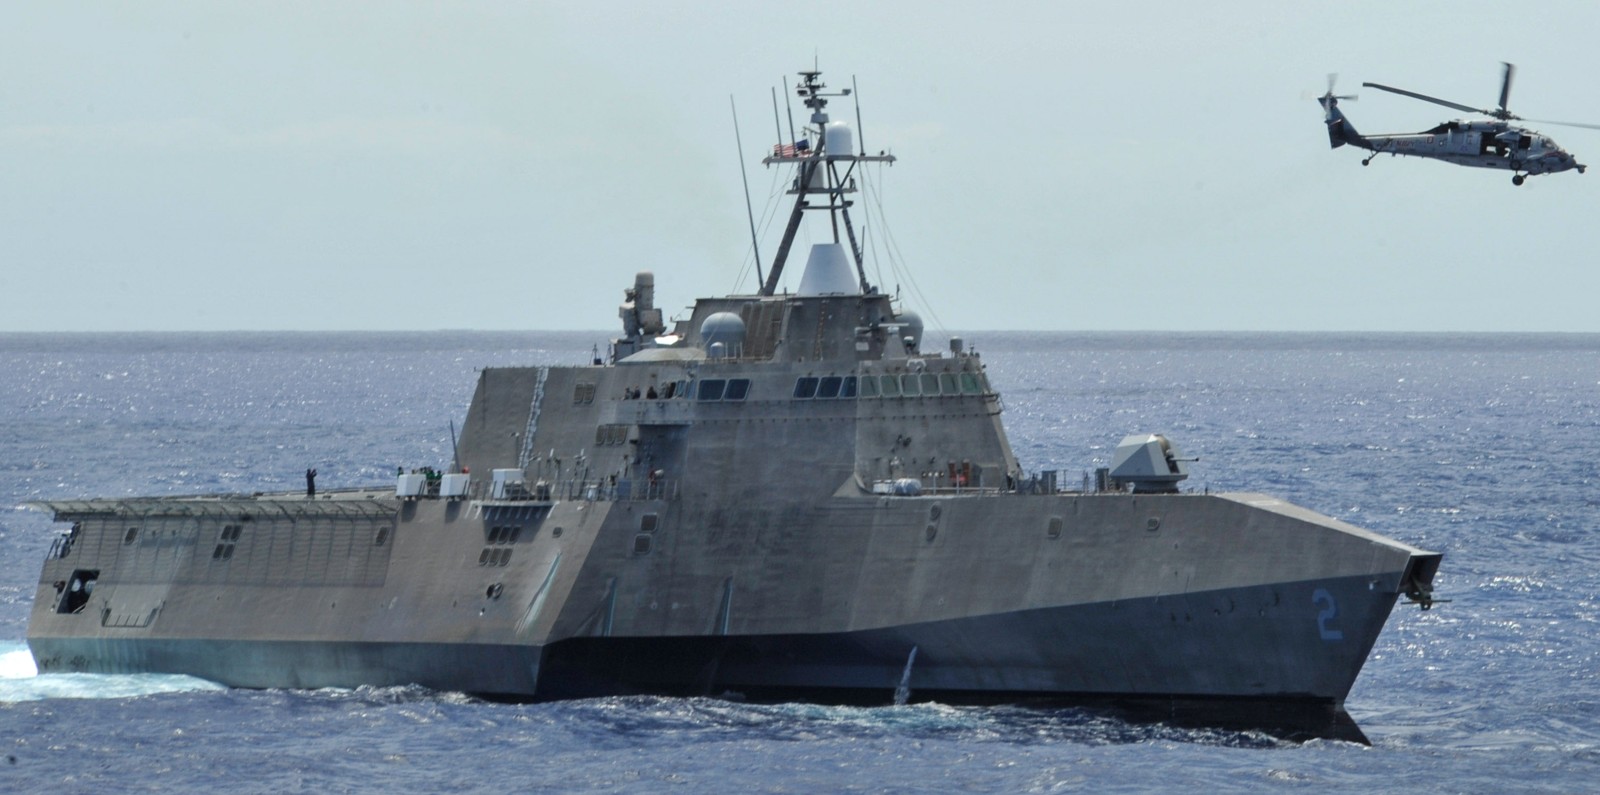 lcs-2 uss independence littoral combat ship us navy class 12